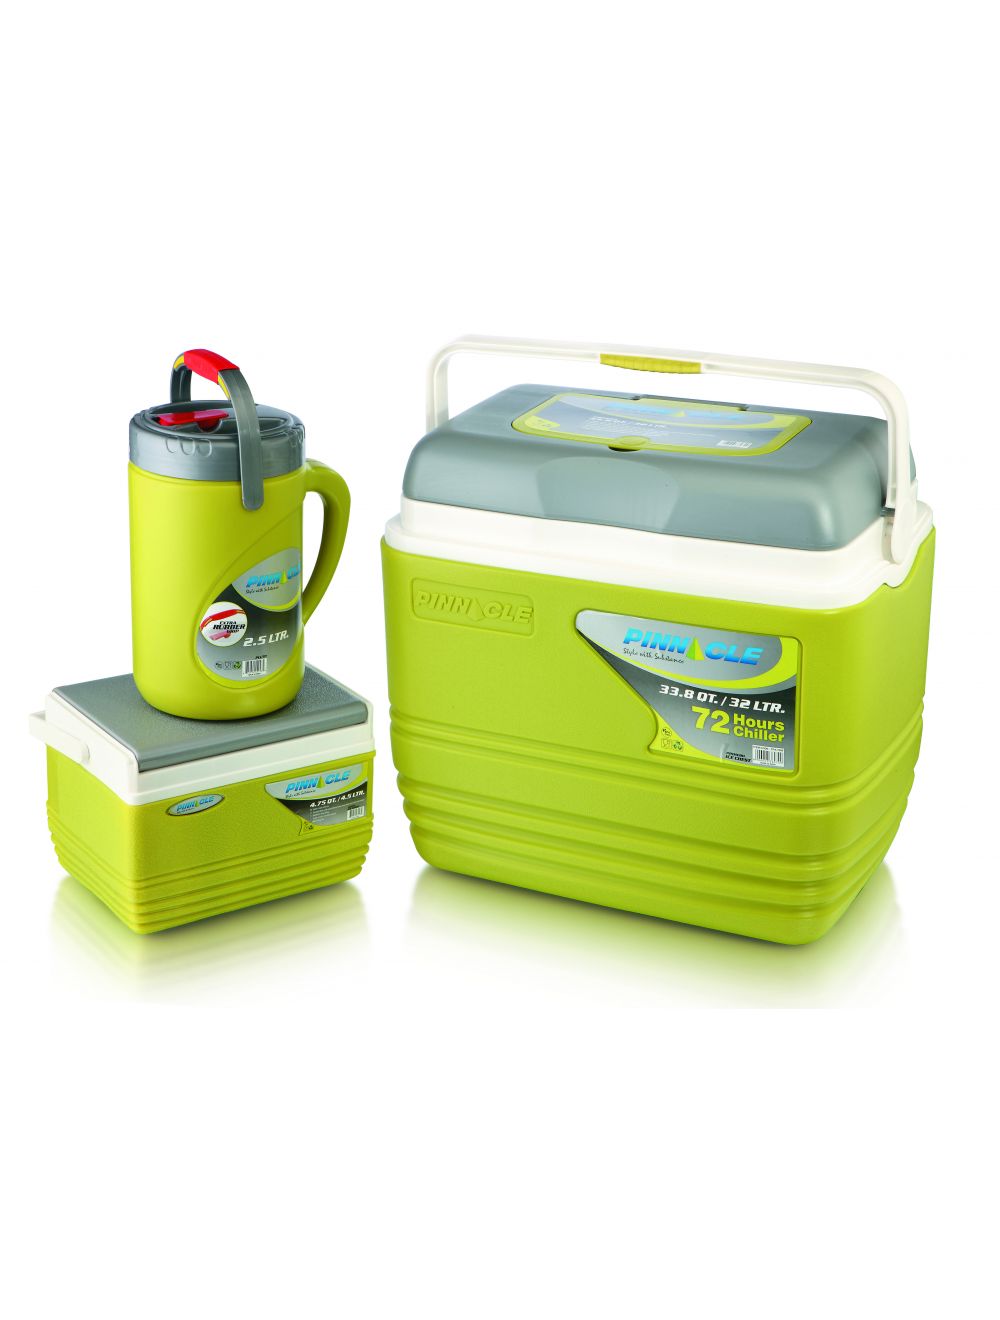 Pinnacle Ice Chest 3pc Set - Green) (Size 32Ltr, 4.5Ltr, 2.5Ltr)-TPX7005-G